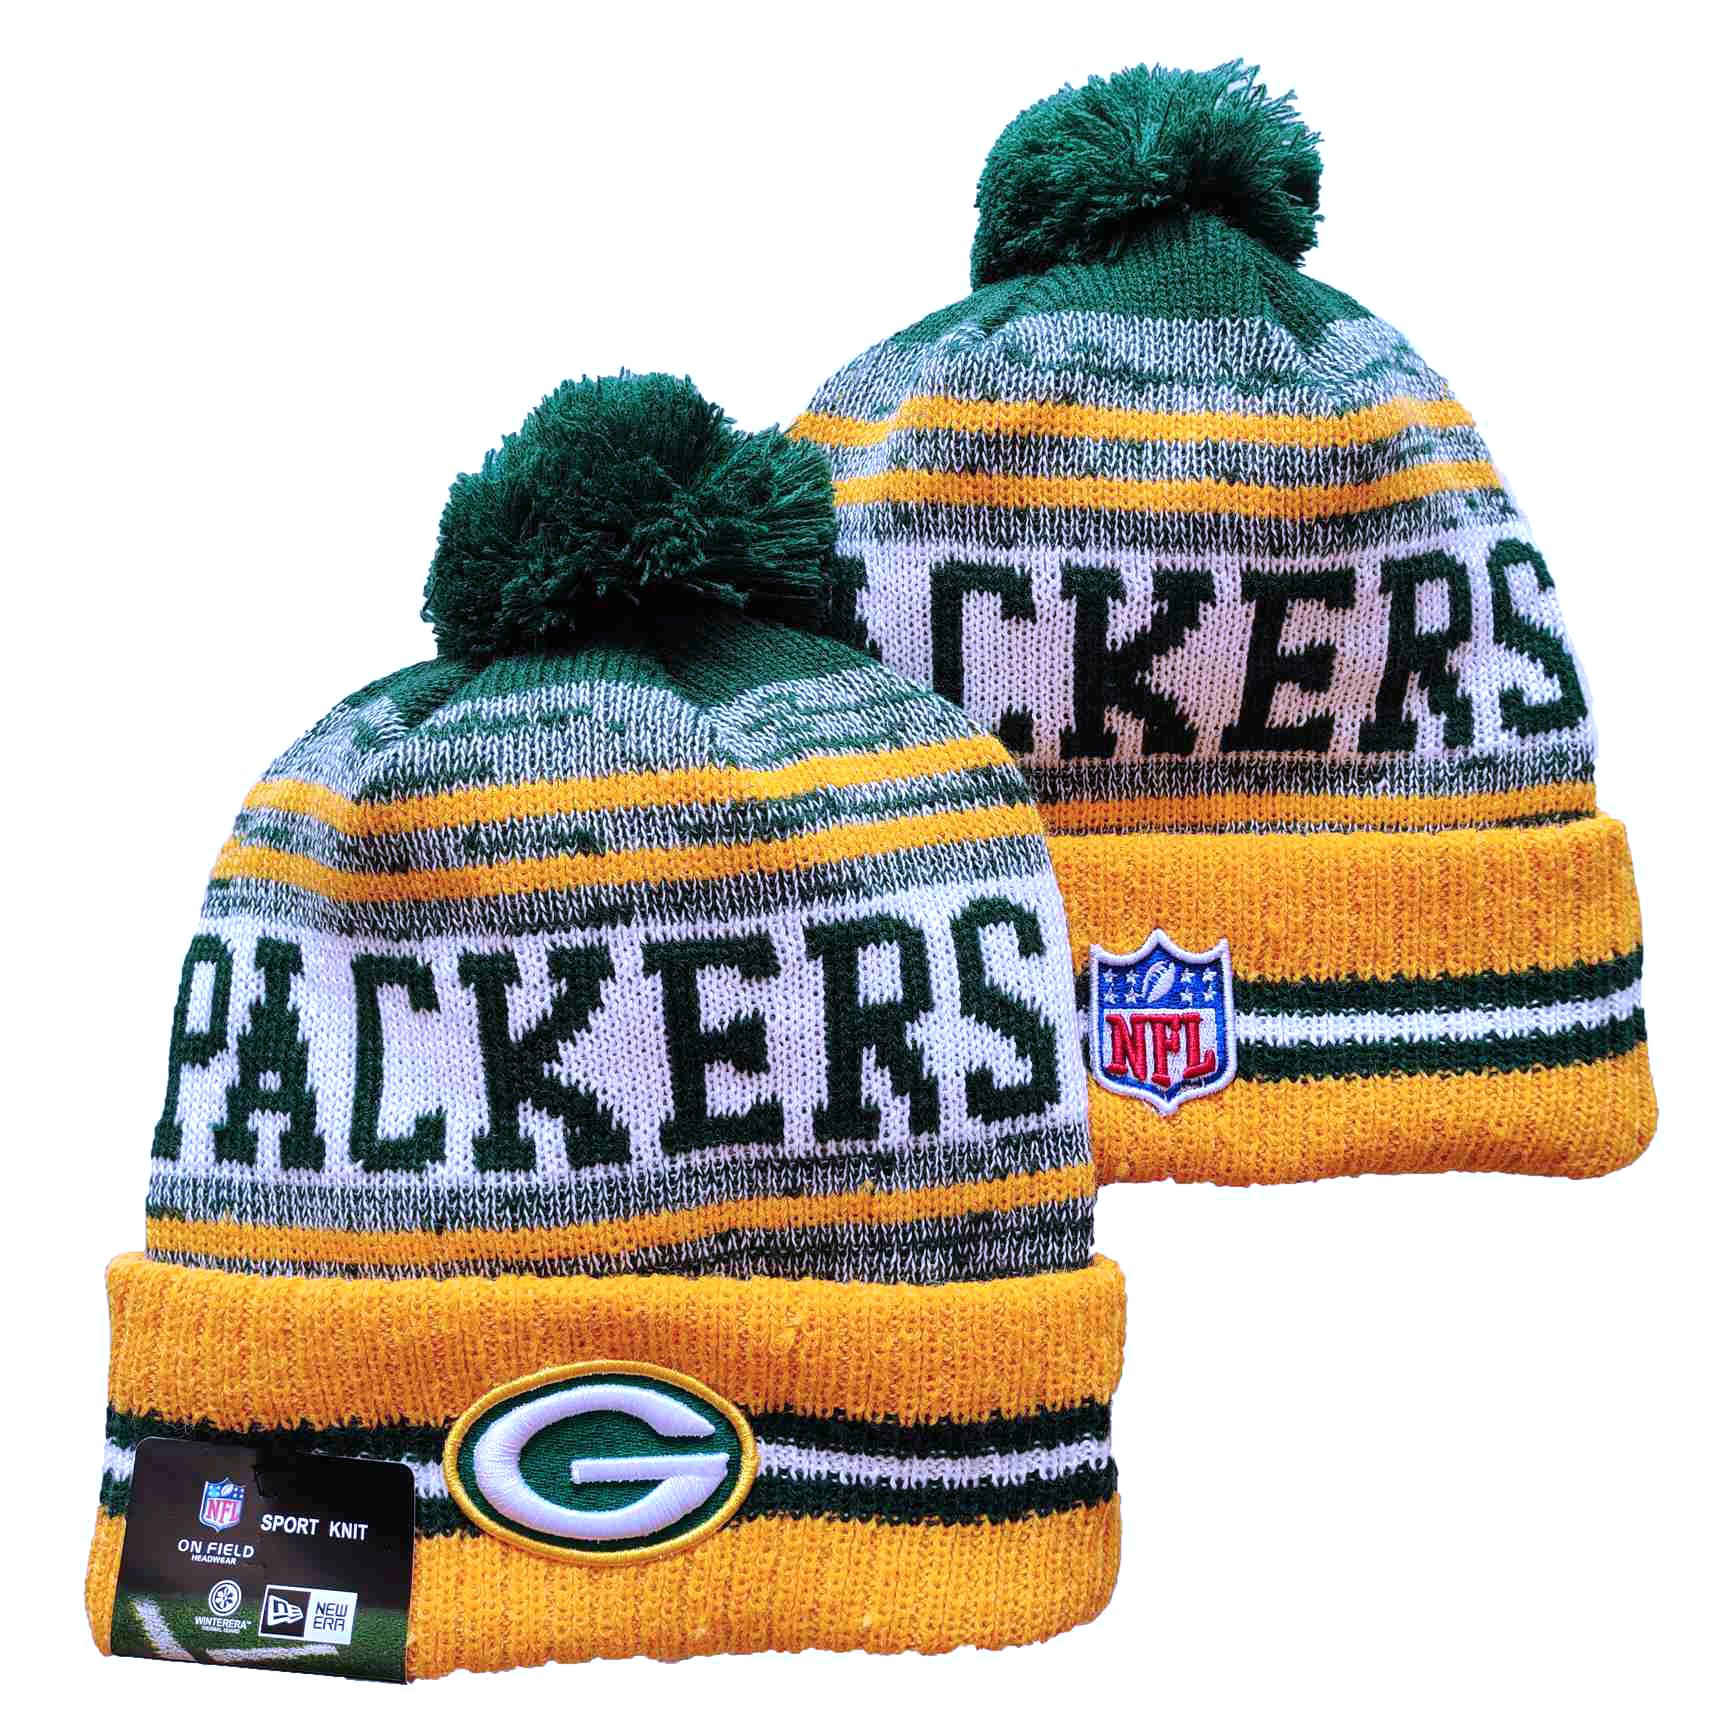 NFL Green Bay Packers Beanies Knit Hats-YD1174